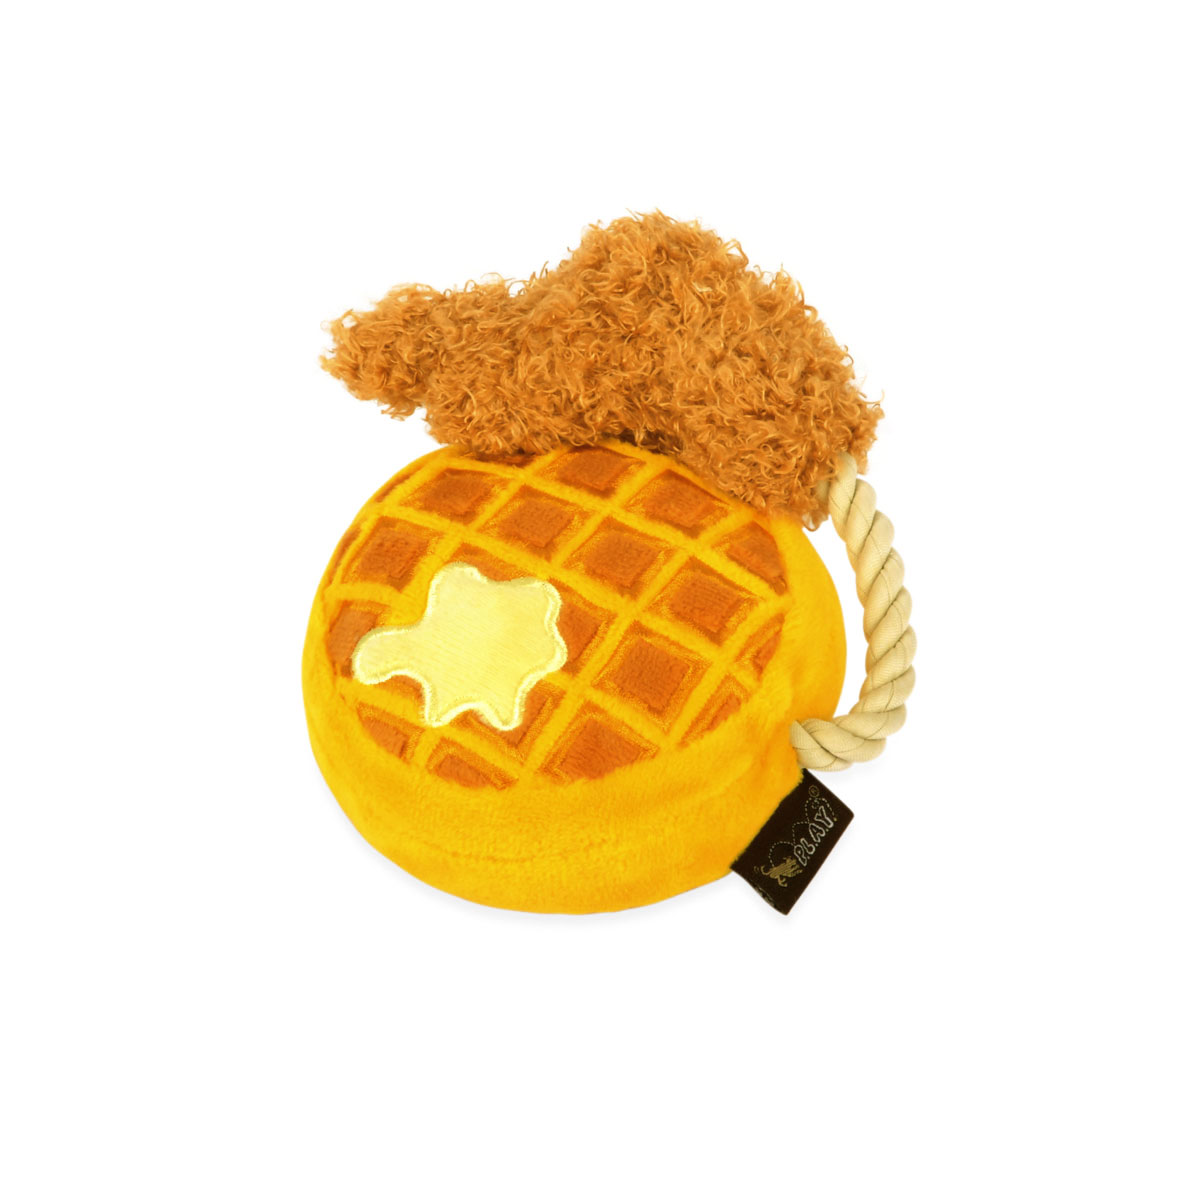 https://halaspaws.com/wp-content/uploads/2022/05/PLAY-Barking-Brunch-Chicken-and-Woofles-Dog-Toy-Mini-top.jpg